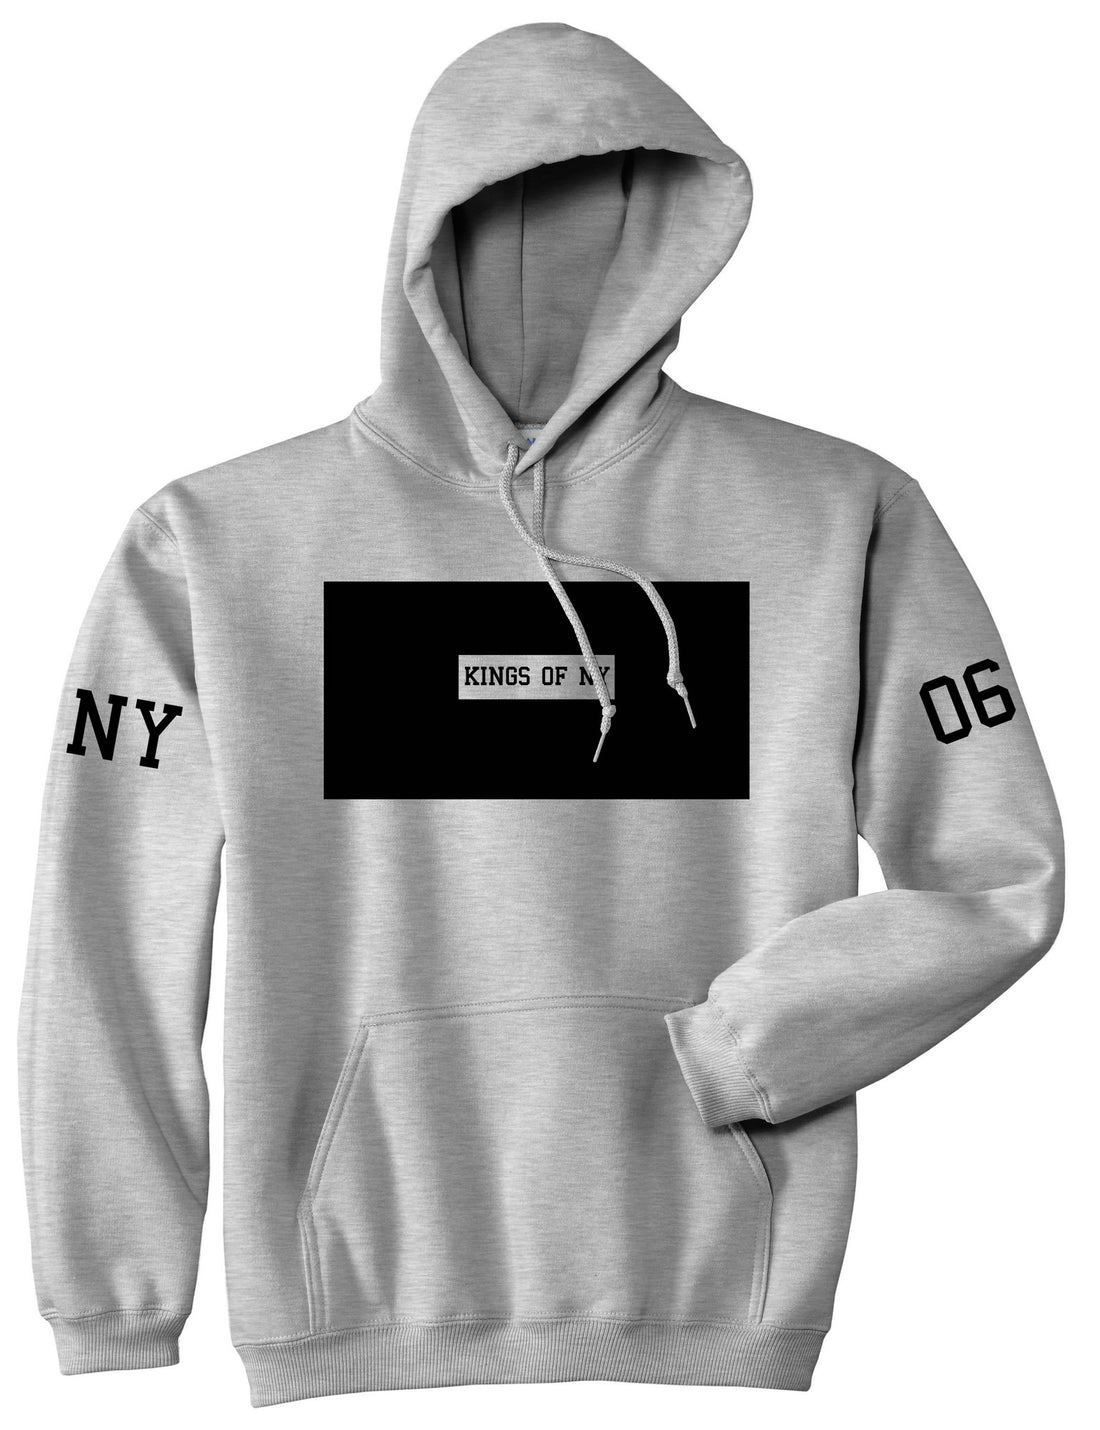 New York Logo 2006 Style Trill Boys Kids Pullover Hoodie Hoody In Grey by Kings Of NY